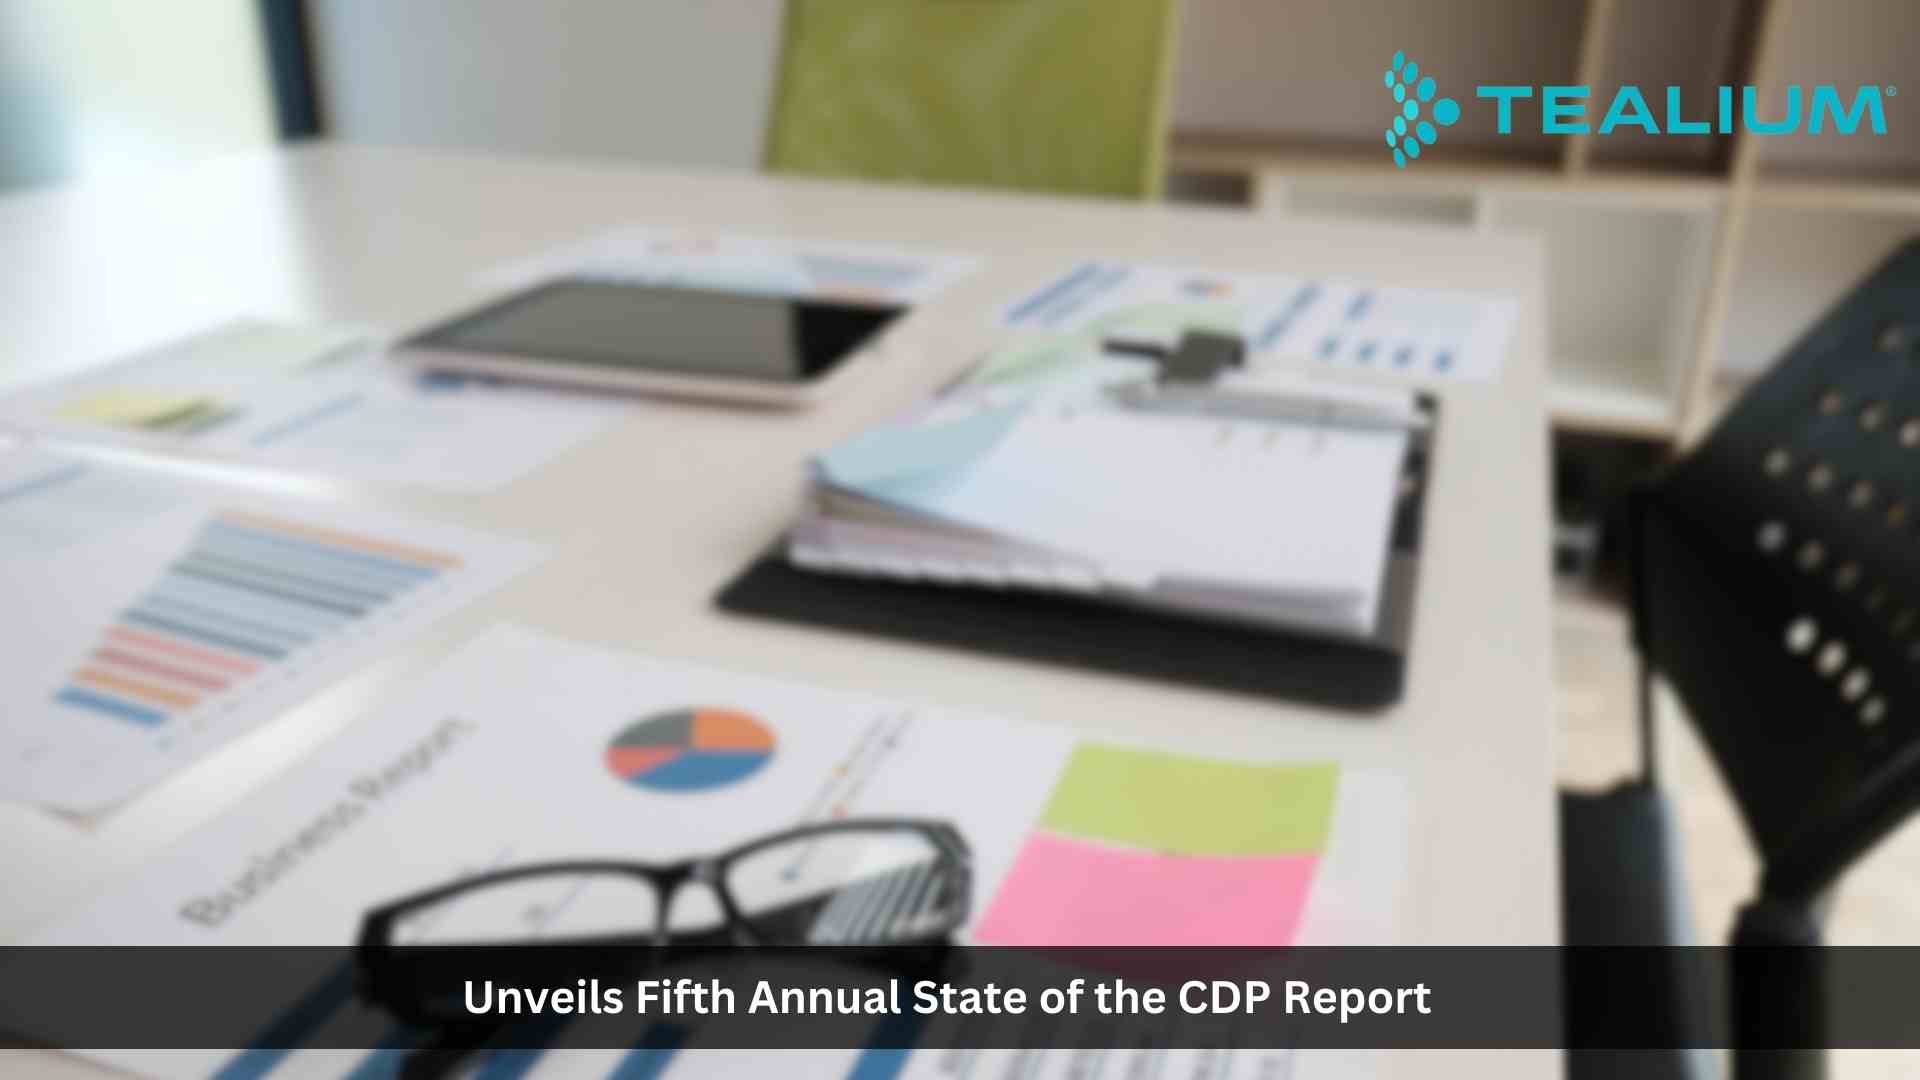 Tealium unveils Fifth Annual State of the CDP Report with insights into future-proofing your business